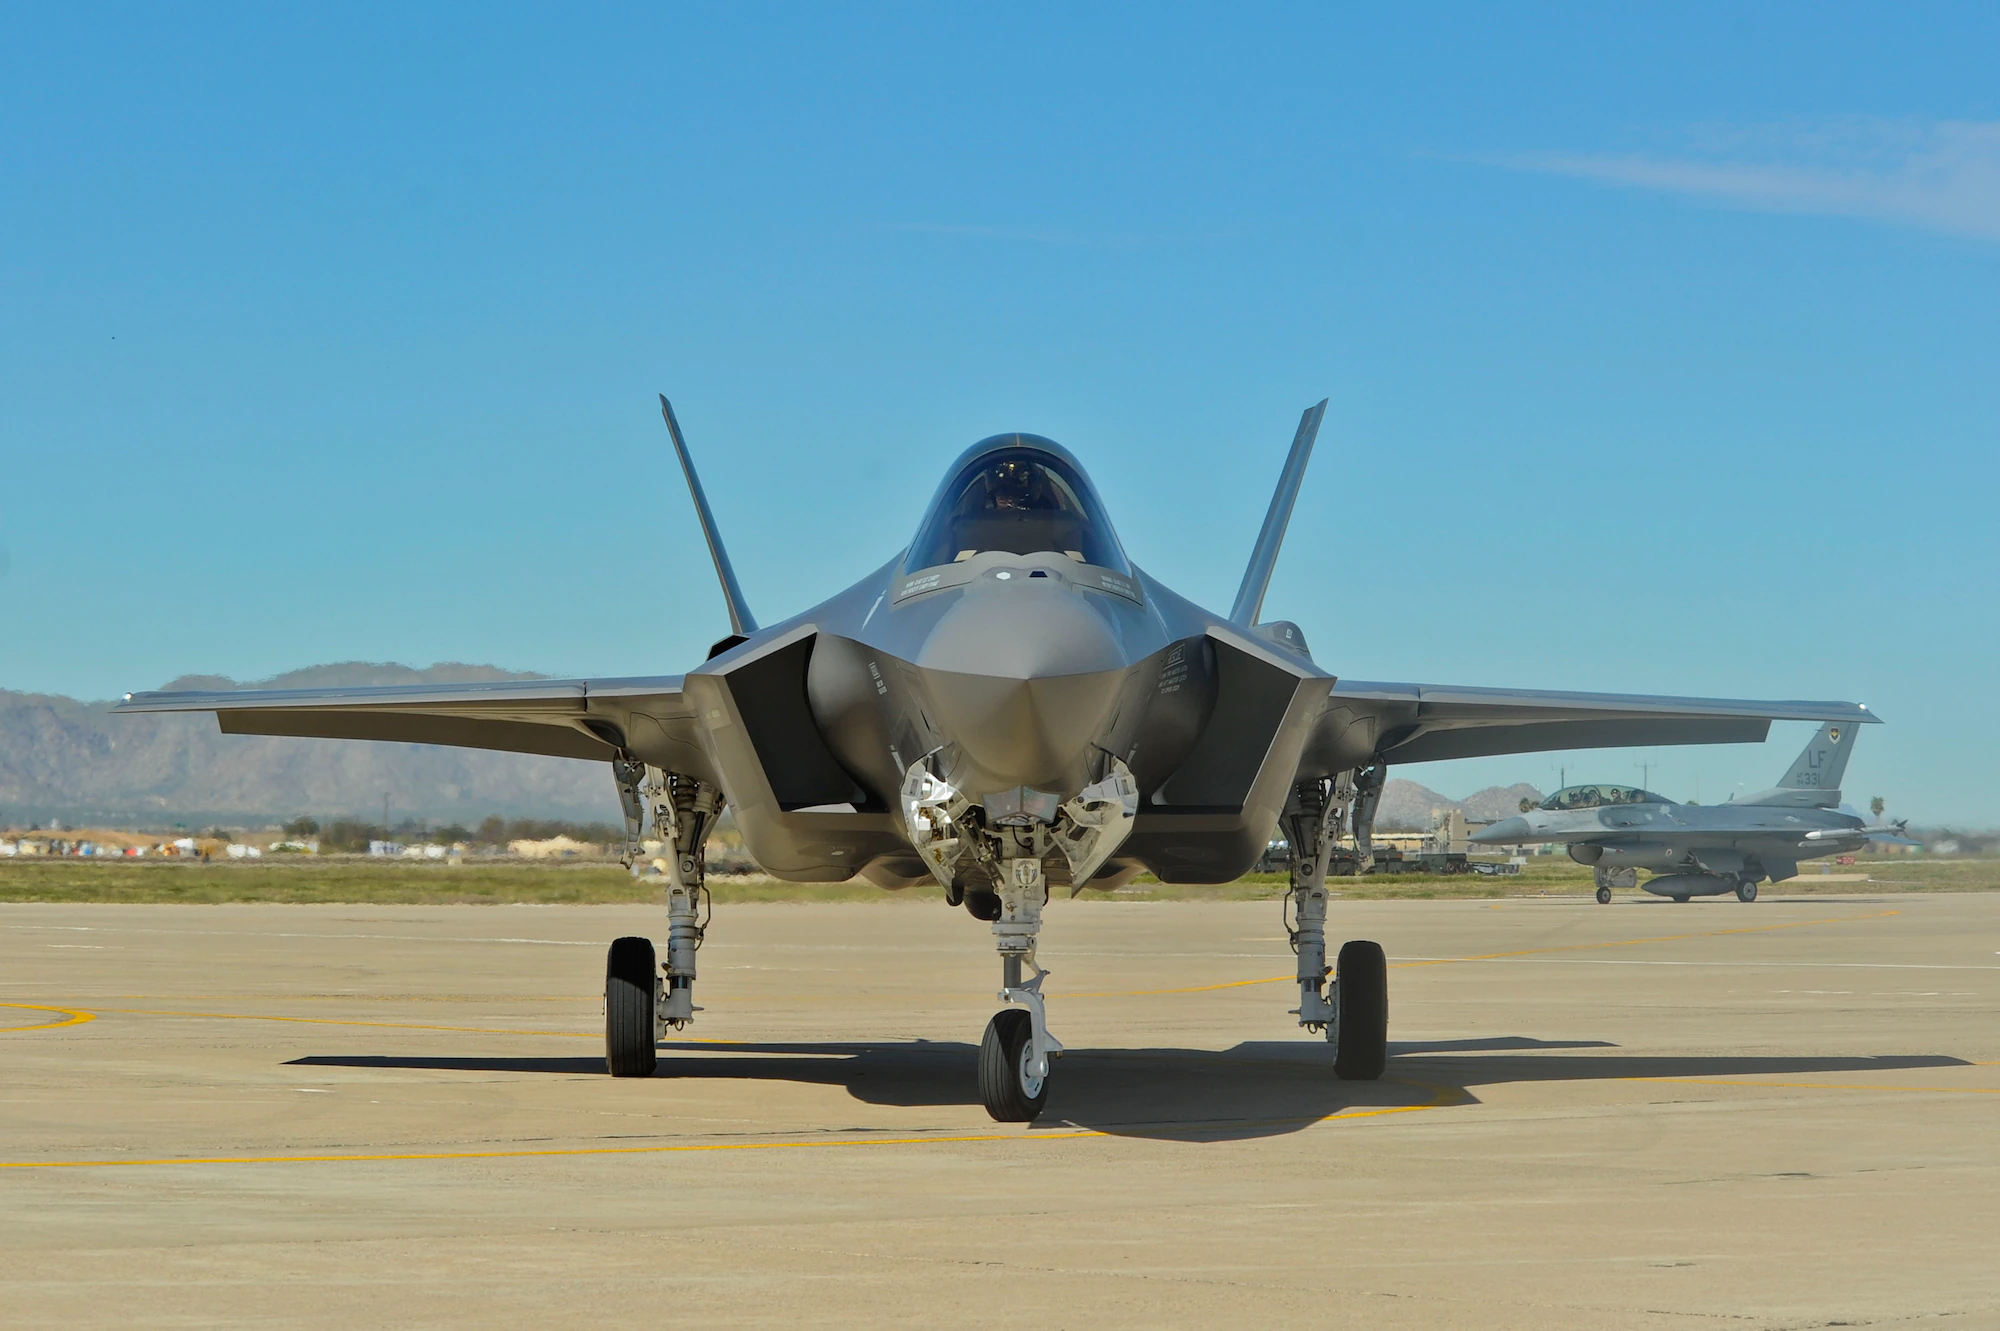 Germany officially announced the purchase of 35 F-35 Lightning II fighters for $8.85 billion